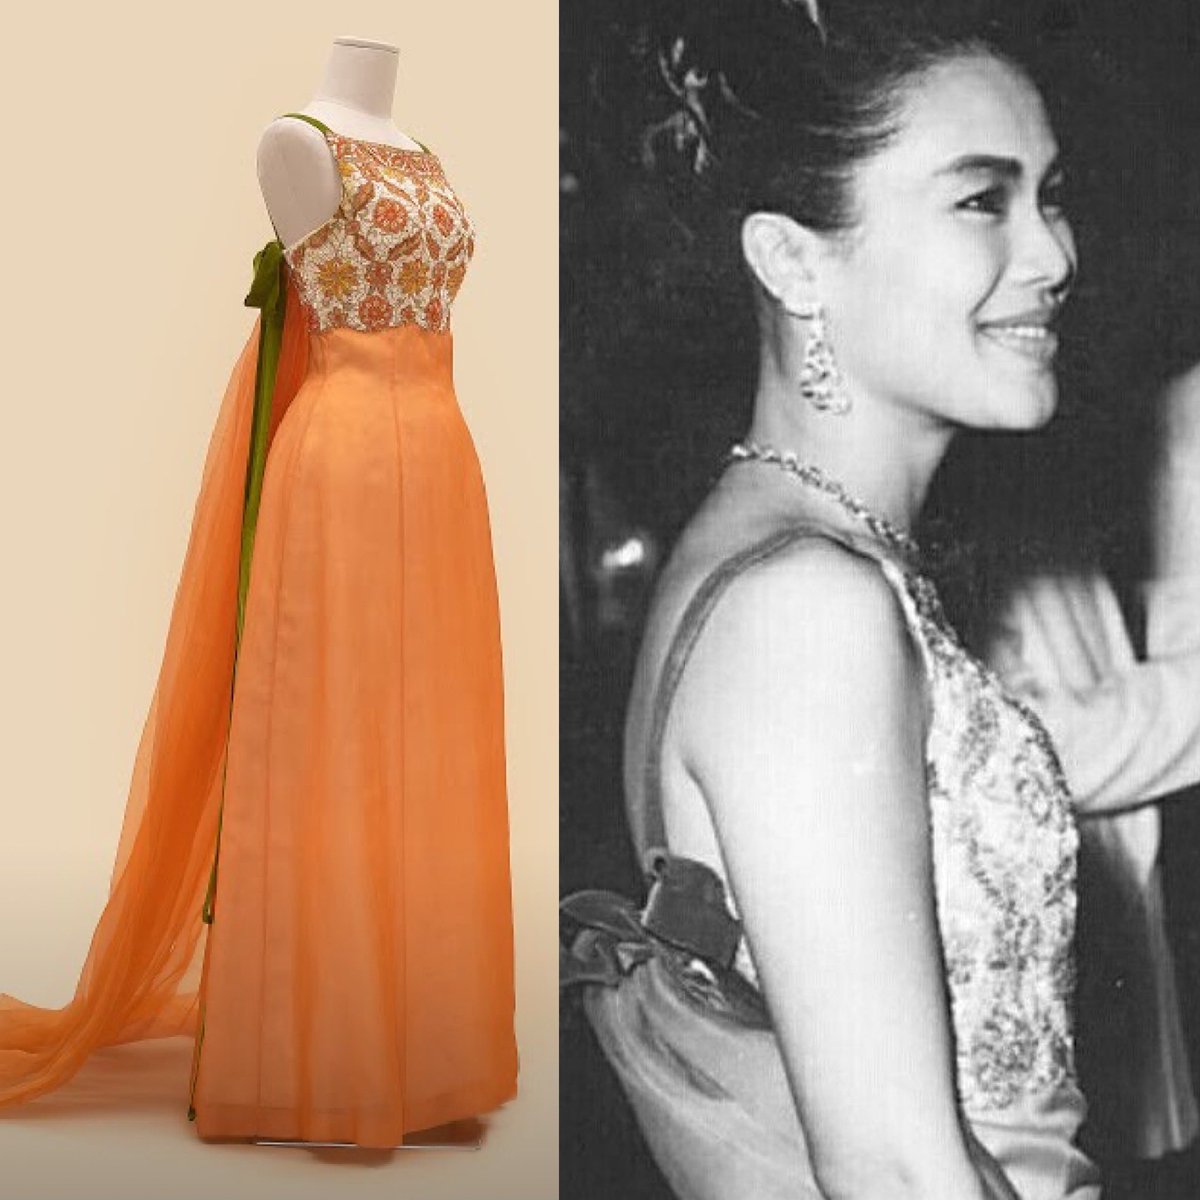 The ‘Marly’ gown by Pierre #Balmain in 1962 was just one of the many garments the designer made for Queen Sirikit of Thailand. The vibrancy of the orange & green are a perfect reflection of the lush Thai landscape & the warmth of frequent sunny days @QSMTBangkok #fashionhistory